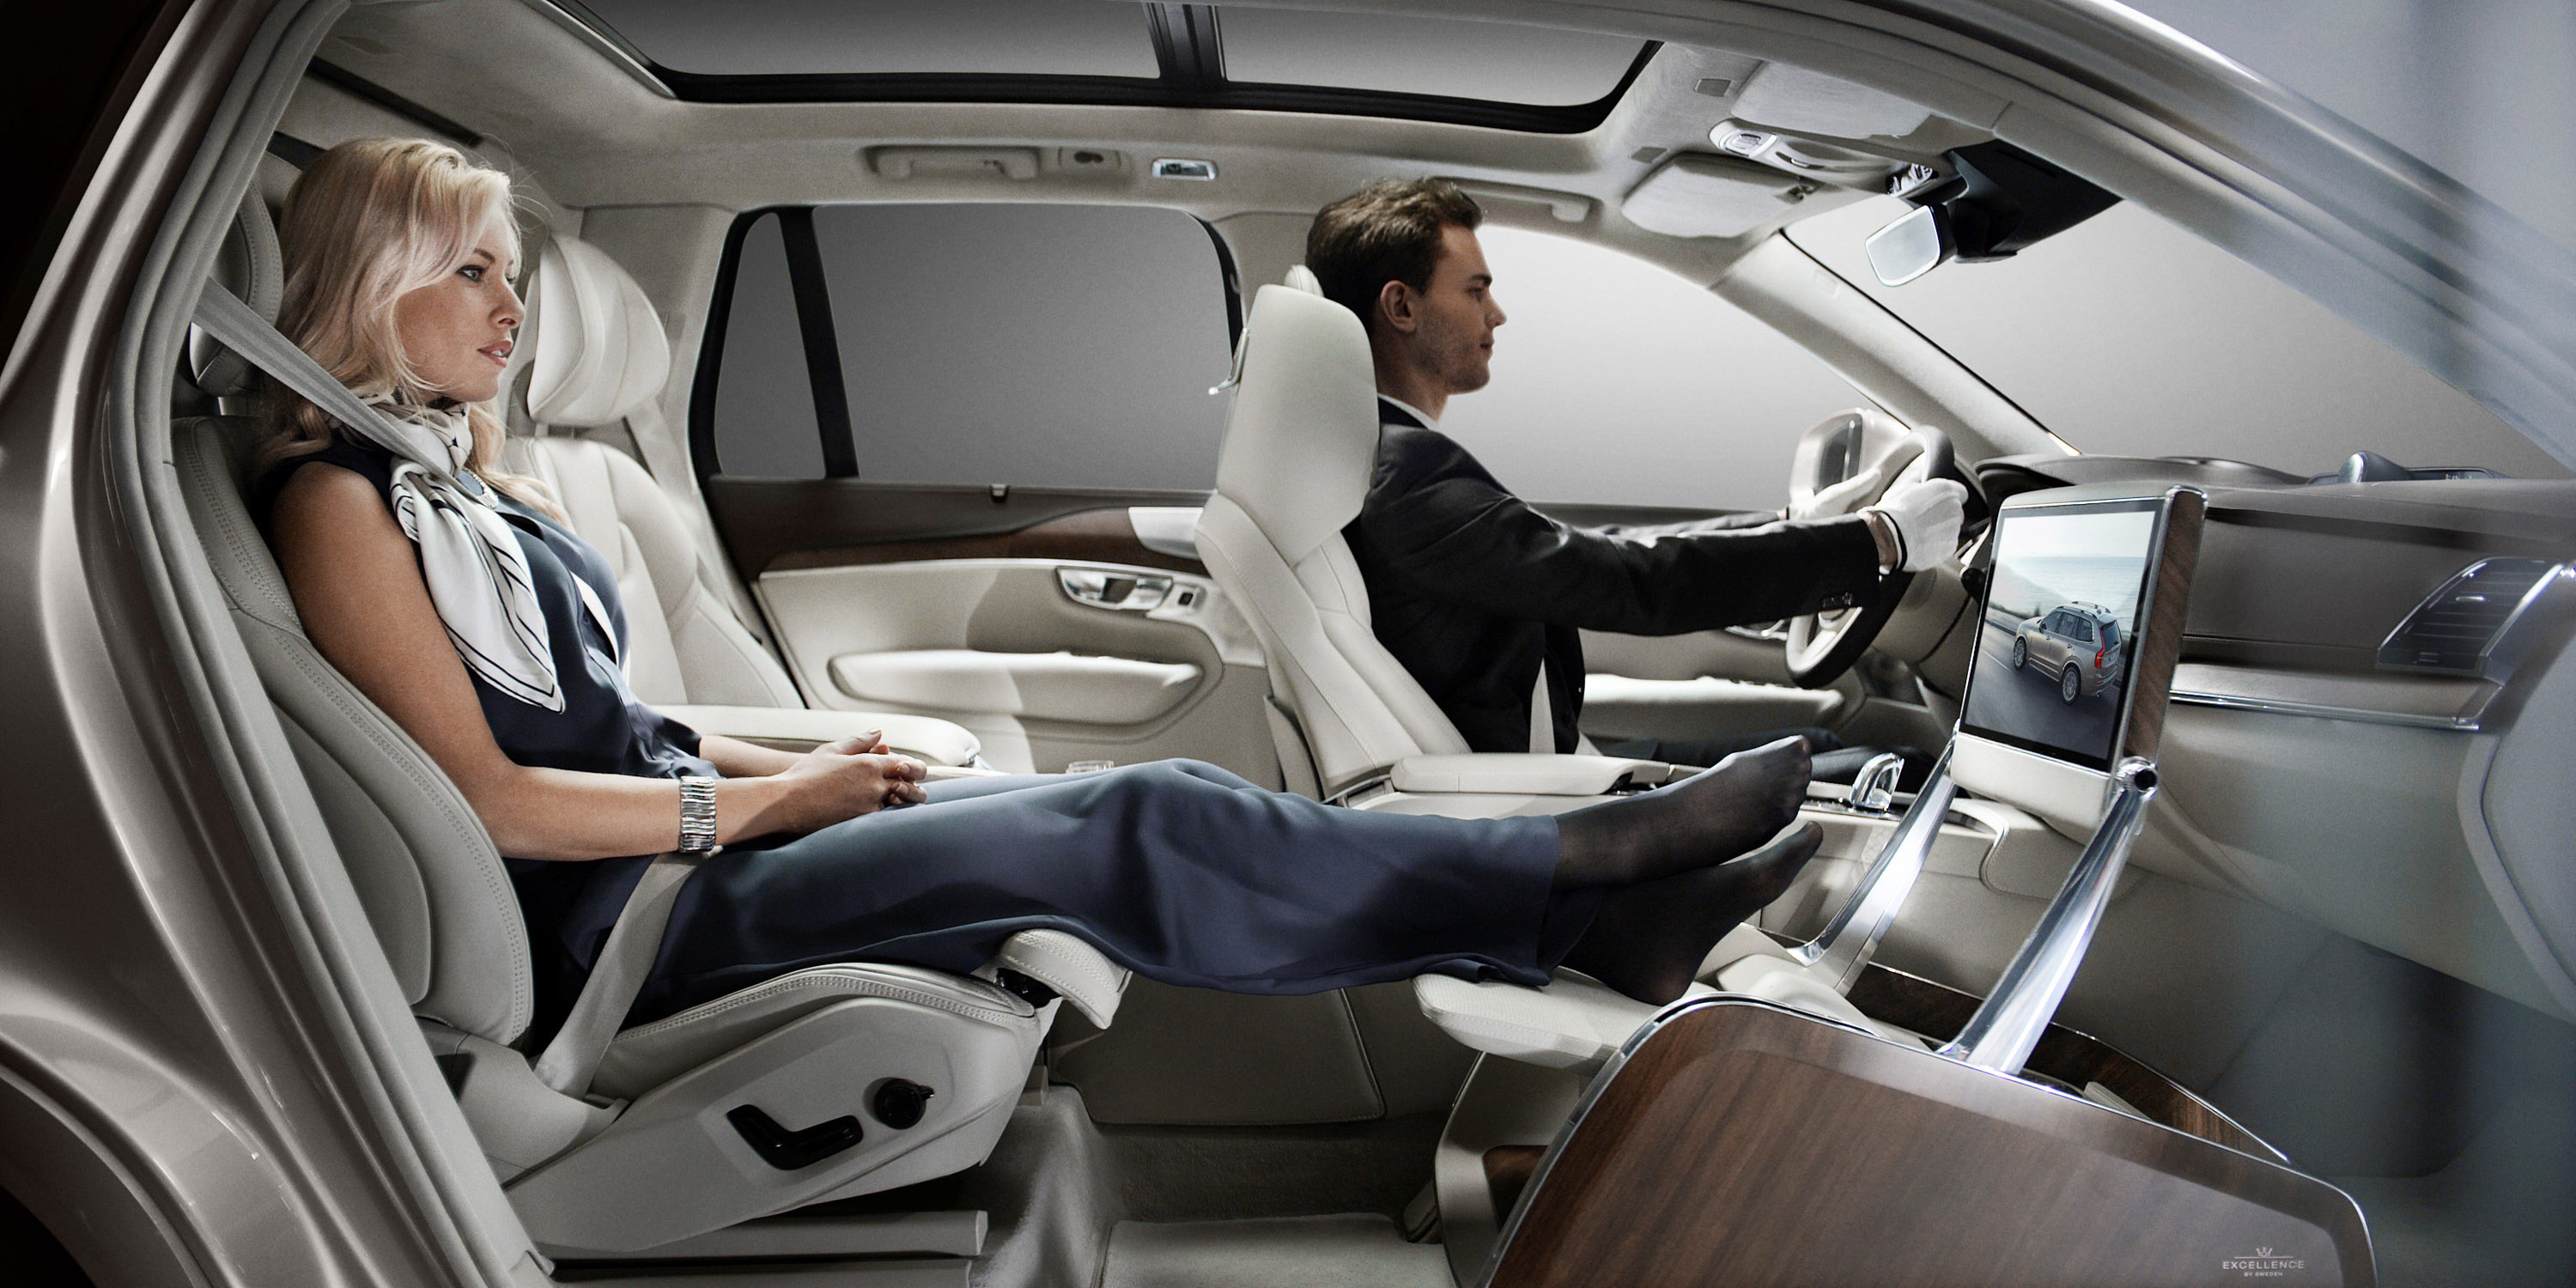 Car offer. Volvo xc90 Excellence. Volvo xc90 Excellence Lounge Console. За рулем Volvo xc90. Volvo xc90 Luxury.